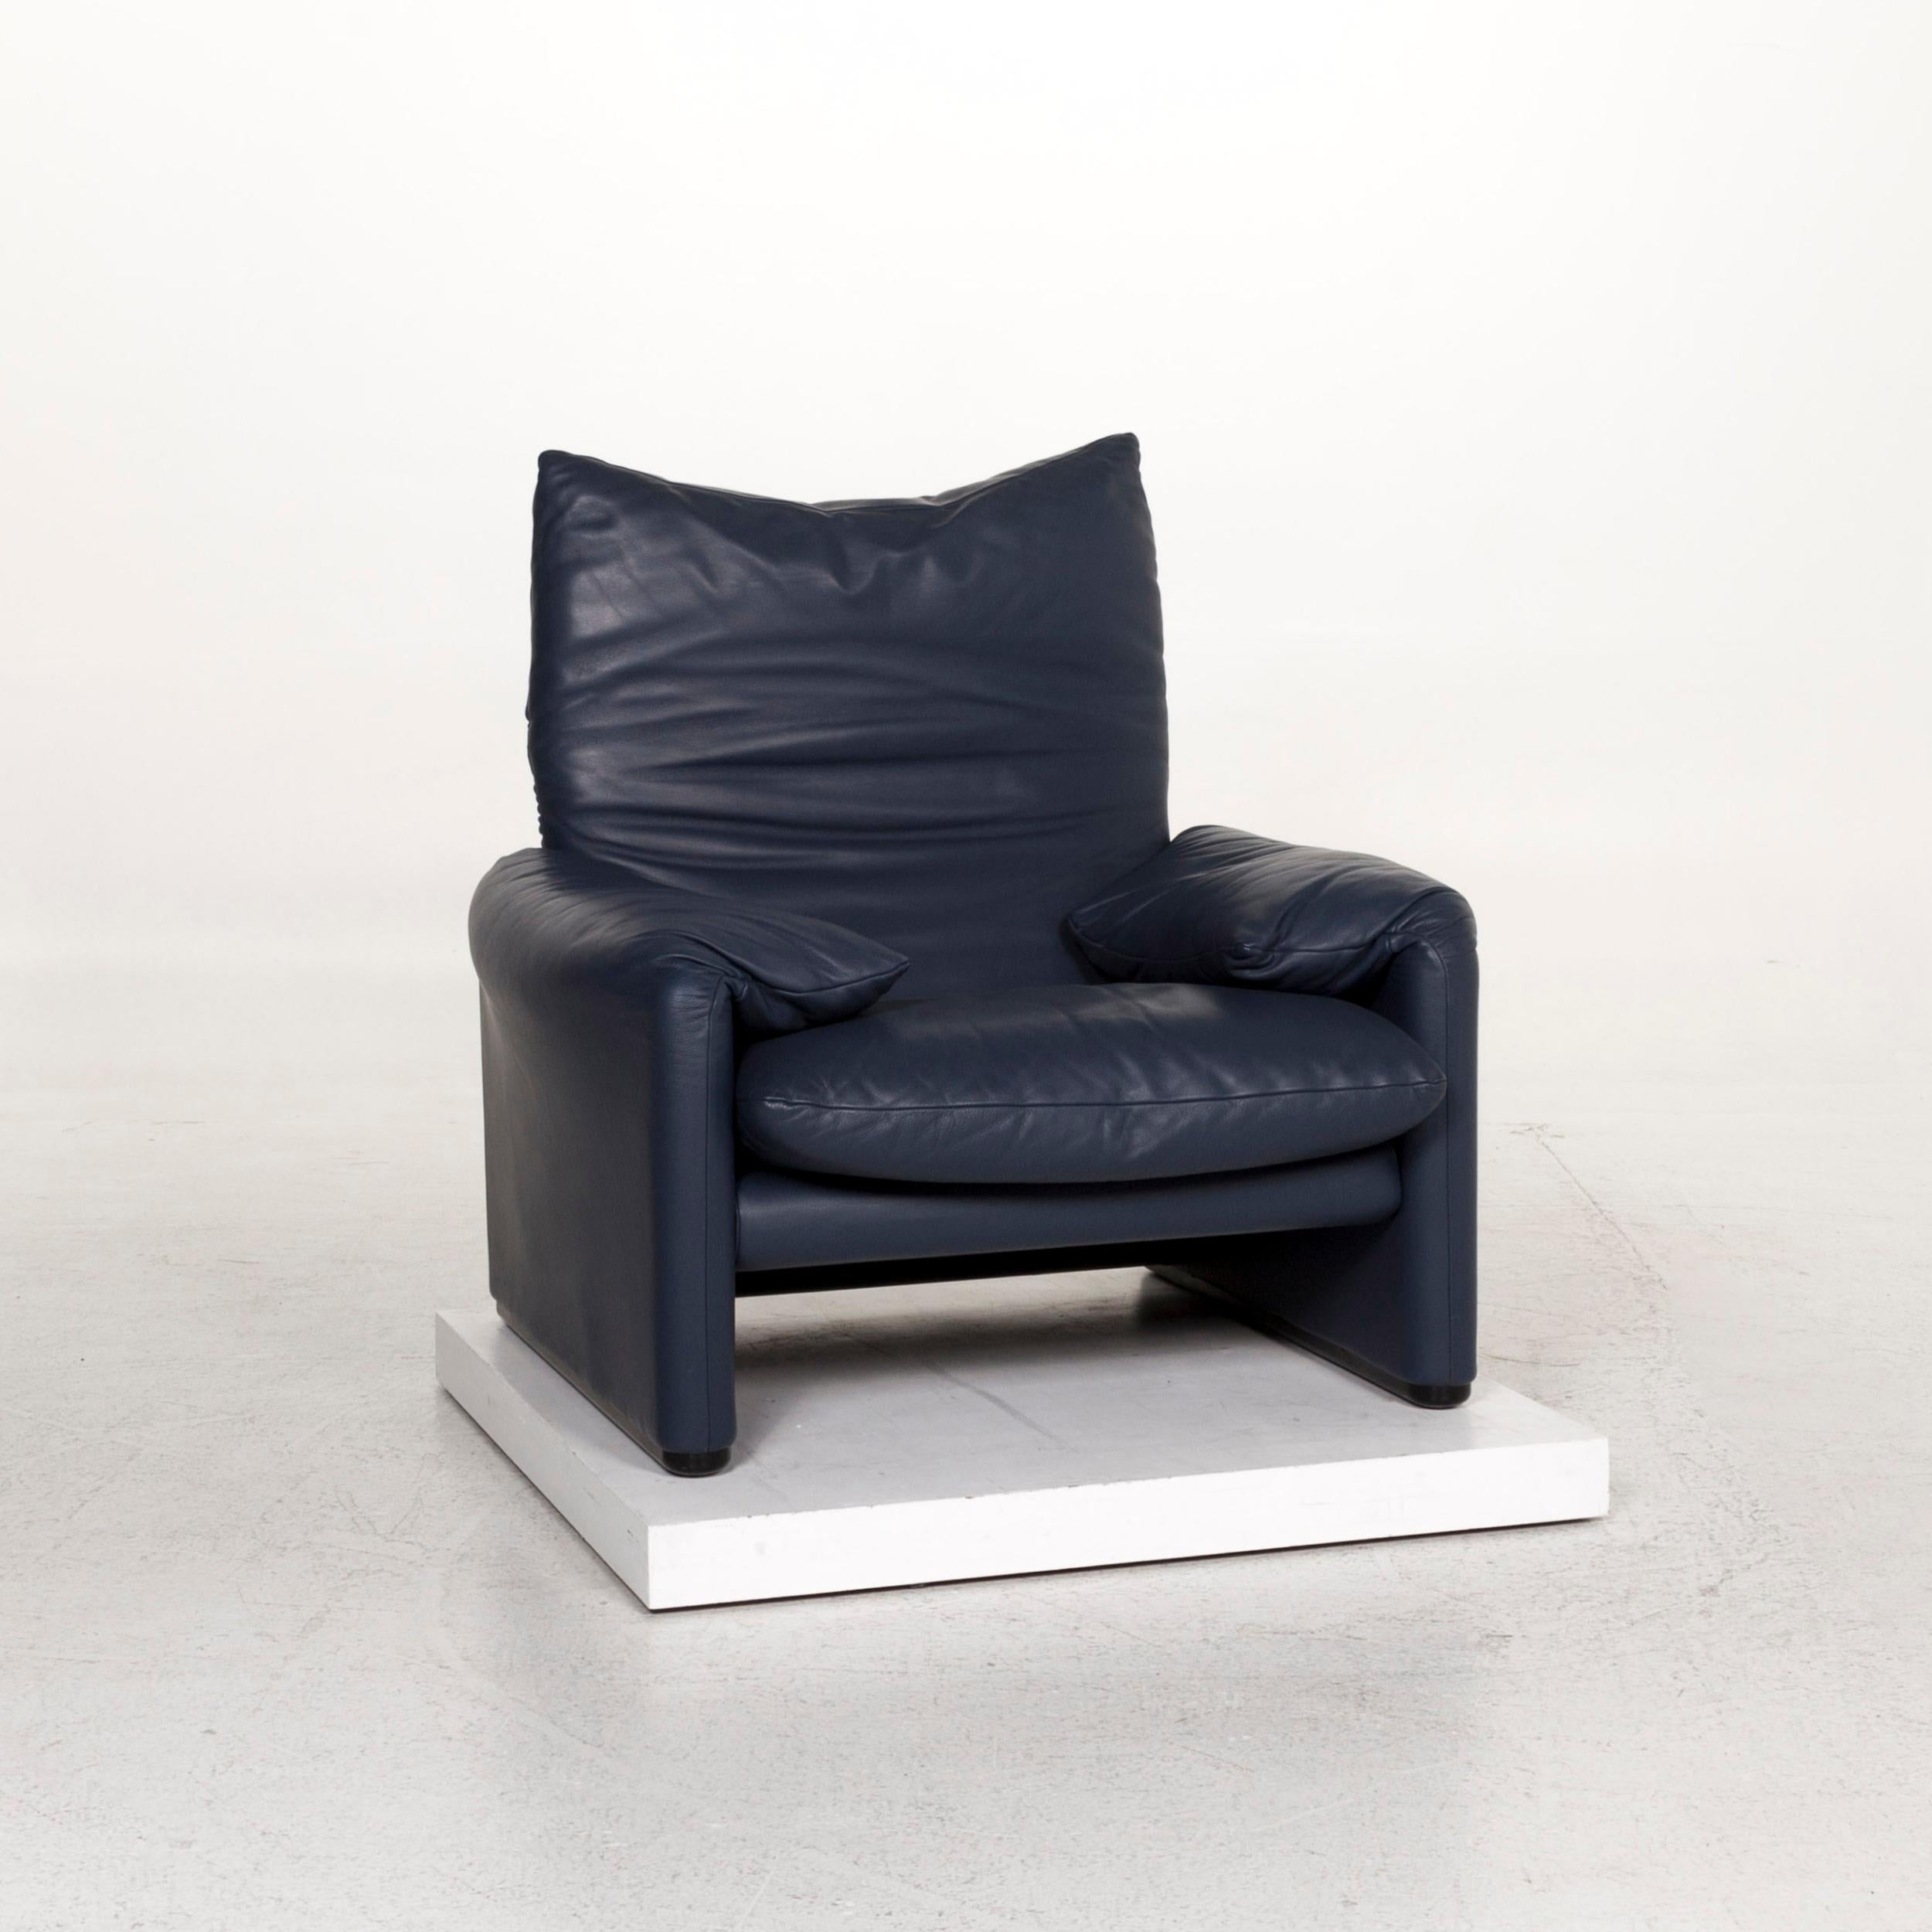 We bring to you a Cassina Maralunga leather armchair blue function.


 Product measurements in centimeters:
 

Depth 83
Width 99
Height 70
Seat-height 41
Rest-height 52
Seat-depth 50
Seat-width 44
Back-height 28.

  